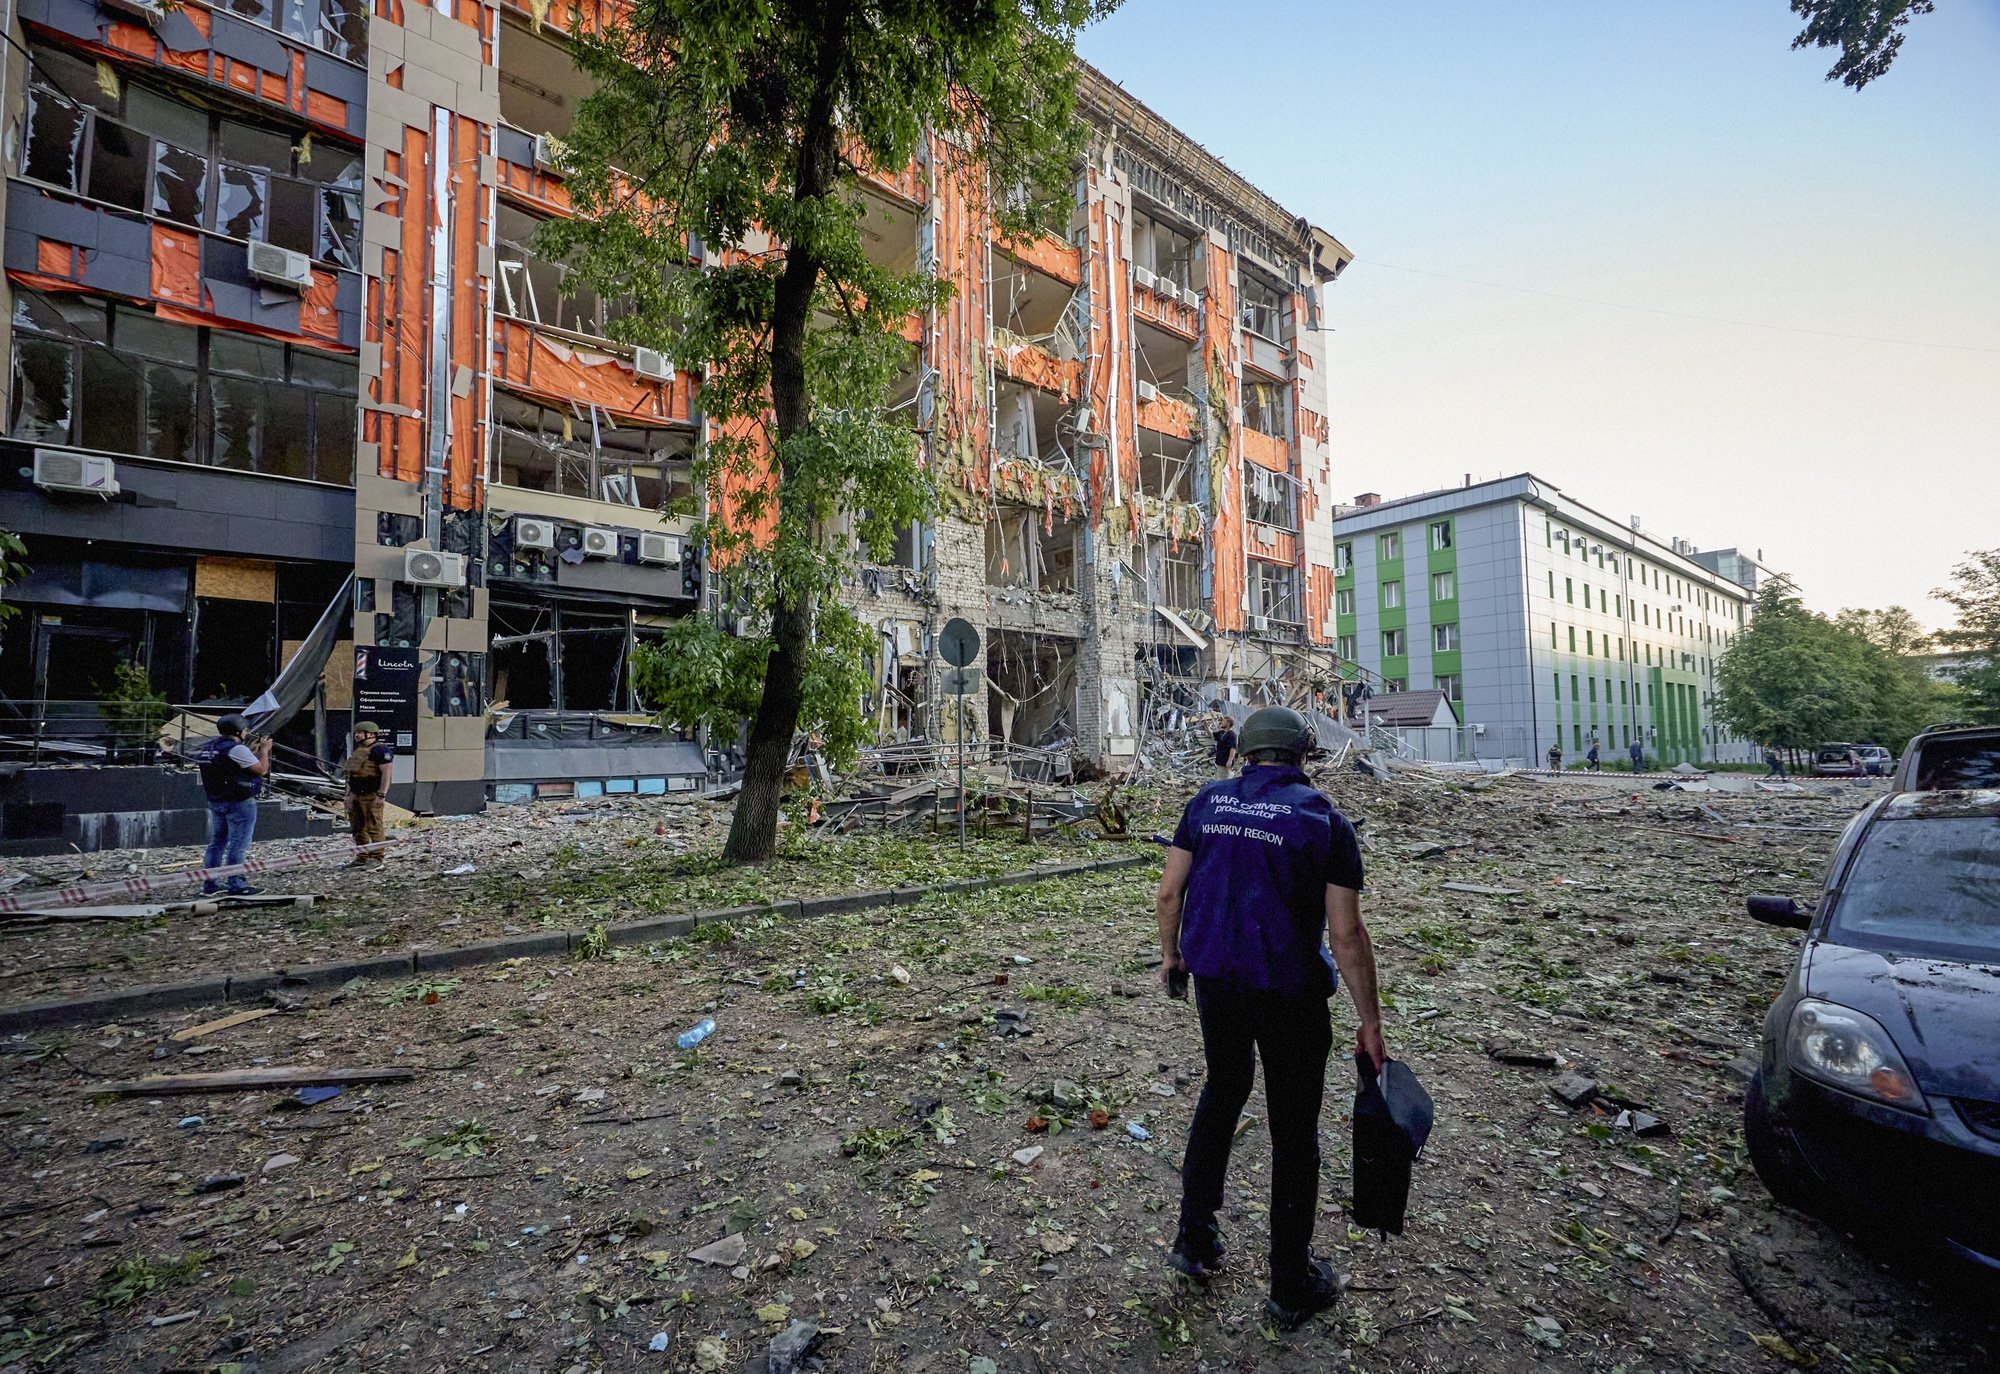 epa11370064 A war crimes prosecutor works at the site of shelling of a residential area in Kharkiv,  Ukraine, 25 May 2024 amid the Russian invasion. Kharkiv has been under massive rocket and glide-bomb attack during all day on May 25. At least 6 people died, 16 people are currently missing, and 33 were wounded in the glide-bombs attack on a hypermarket in Kharkiv today. Also, 18 people bounded in result of residential area shelling according to the report of the head of the Kharkiv Military Administration Oleg Synegubov. Russian troops entered Ukrainian territory on 24 February 2022, starting a conflict that has provoked destruction and a humanitarian crisis.  EPA/SERGEY KOZLOV 53533